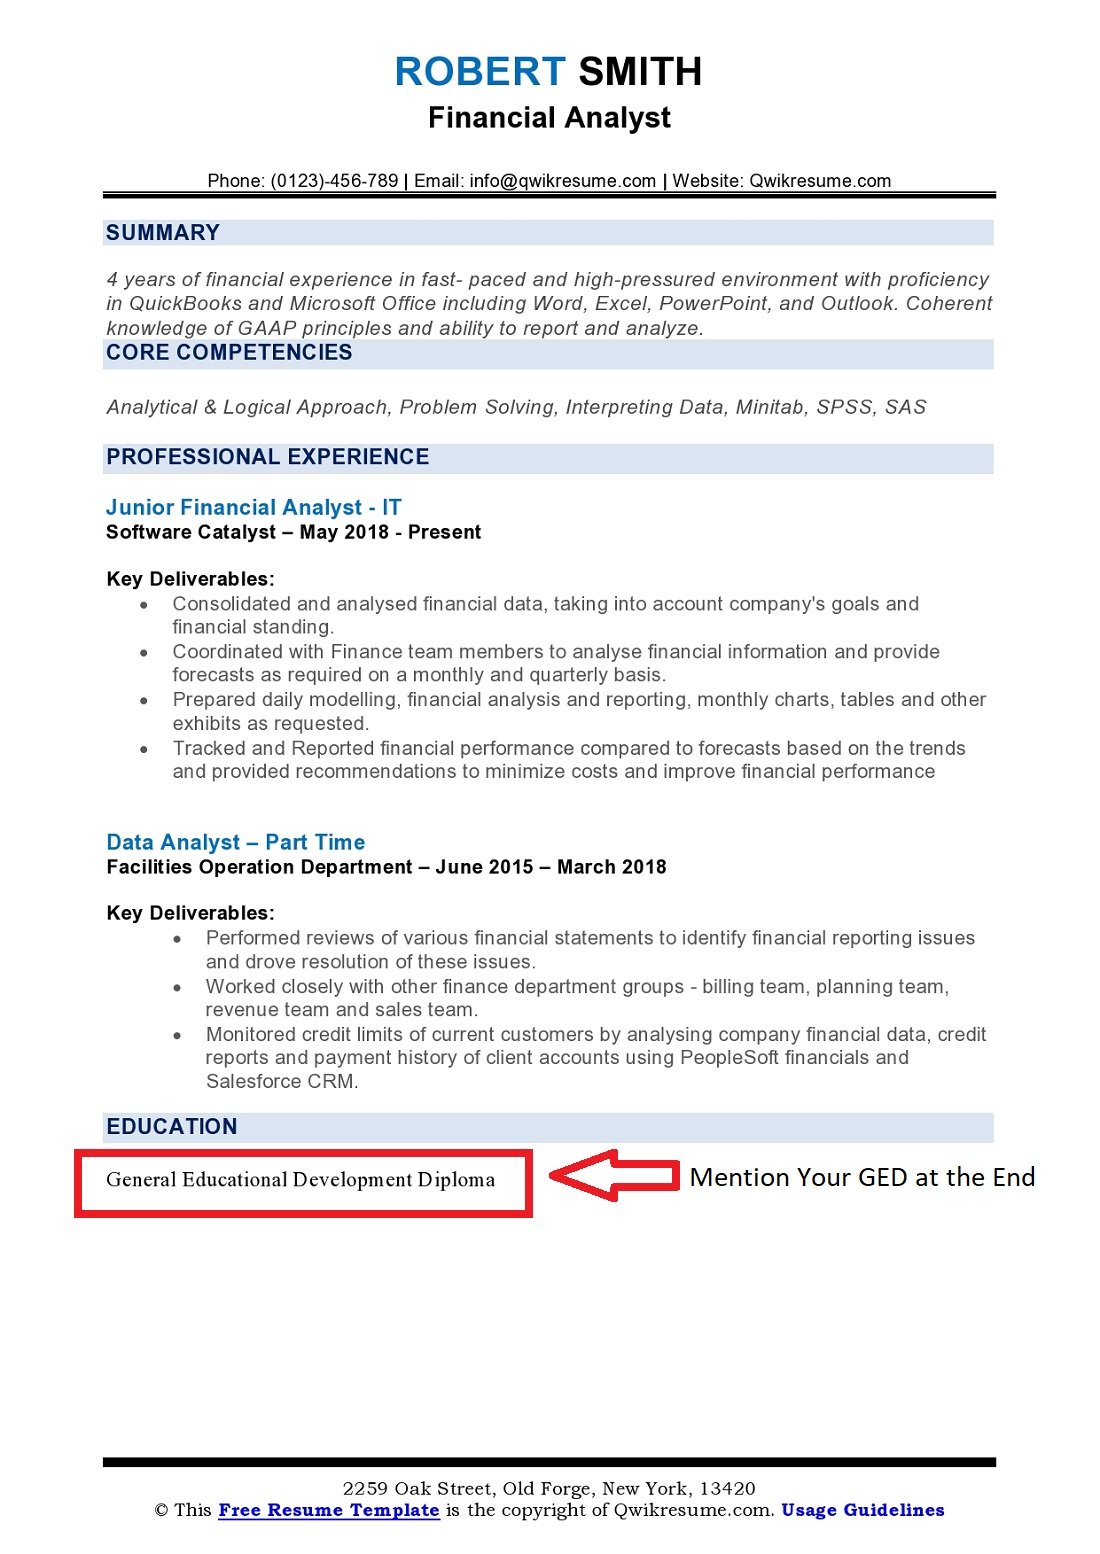 How to Put GED on Resume